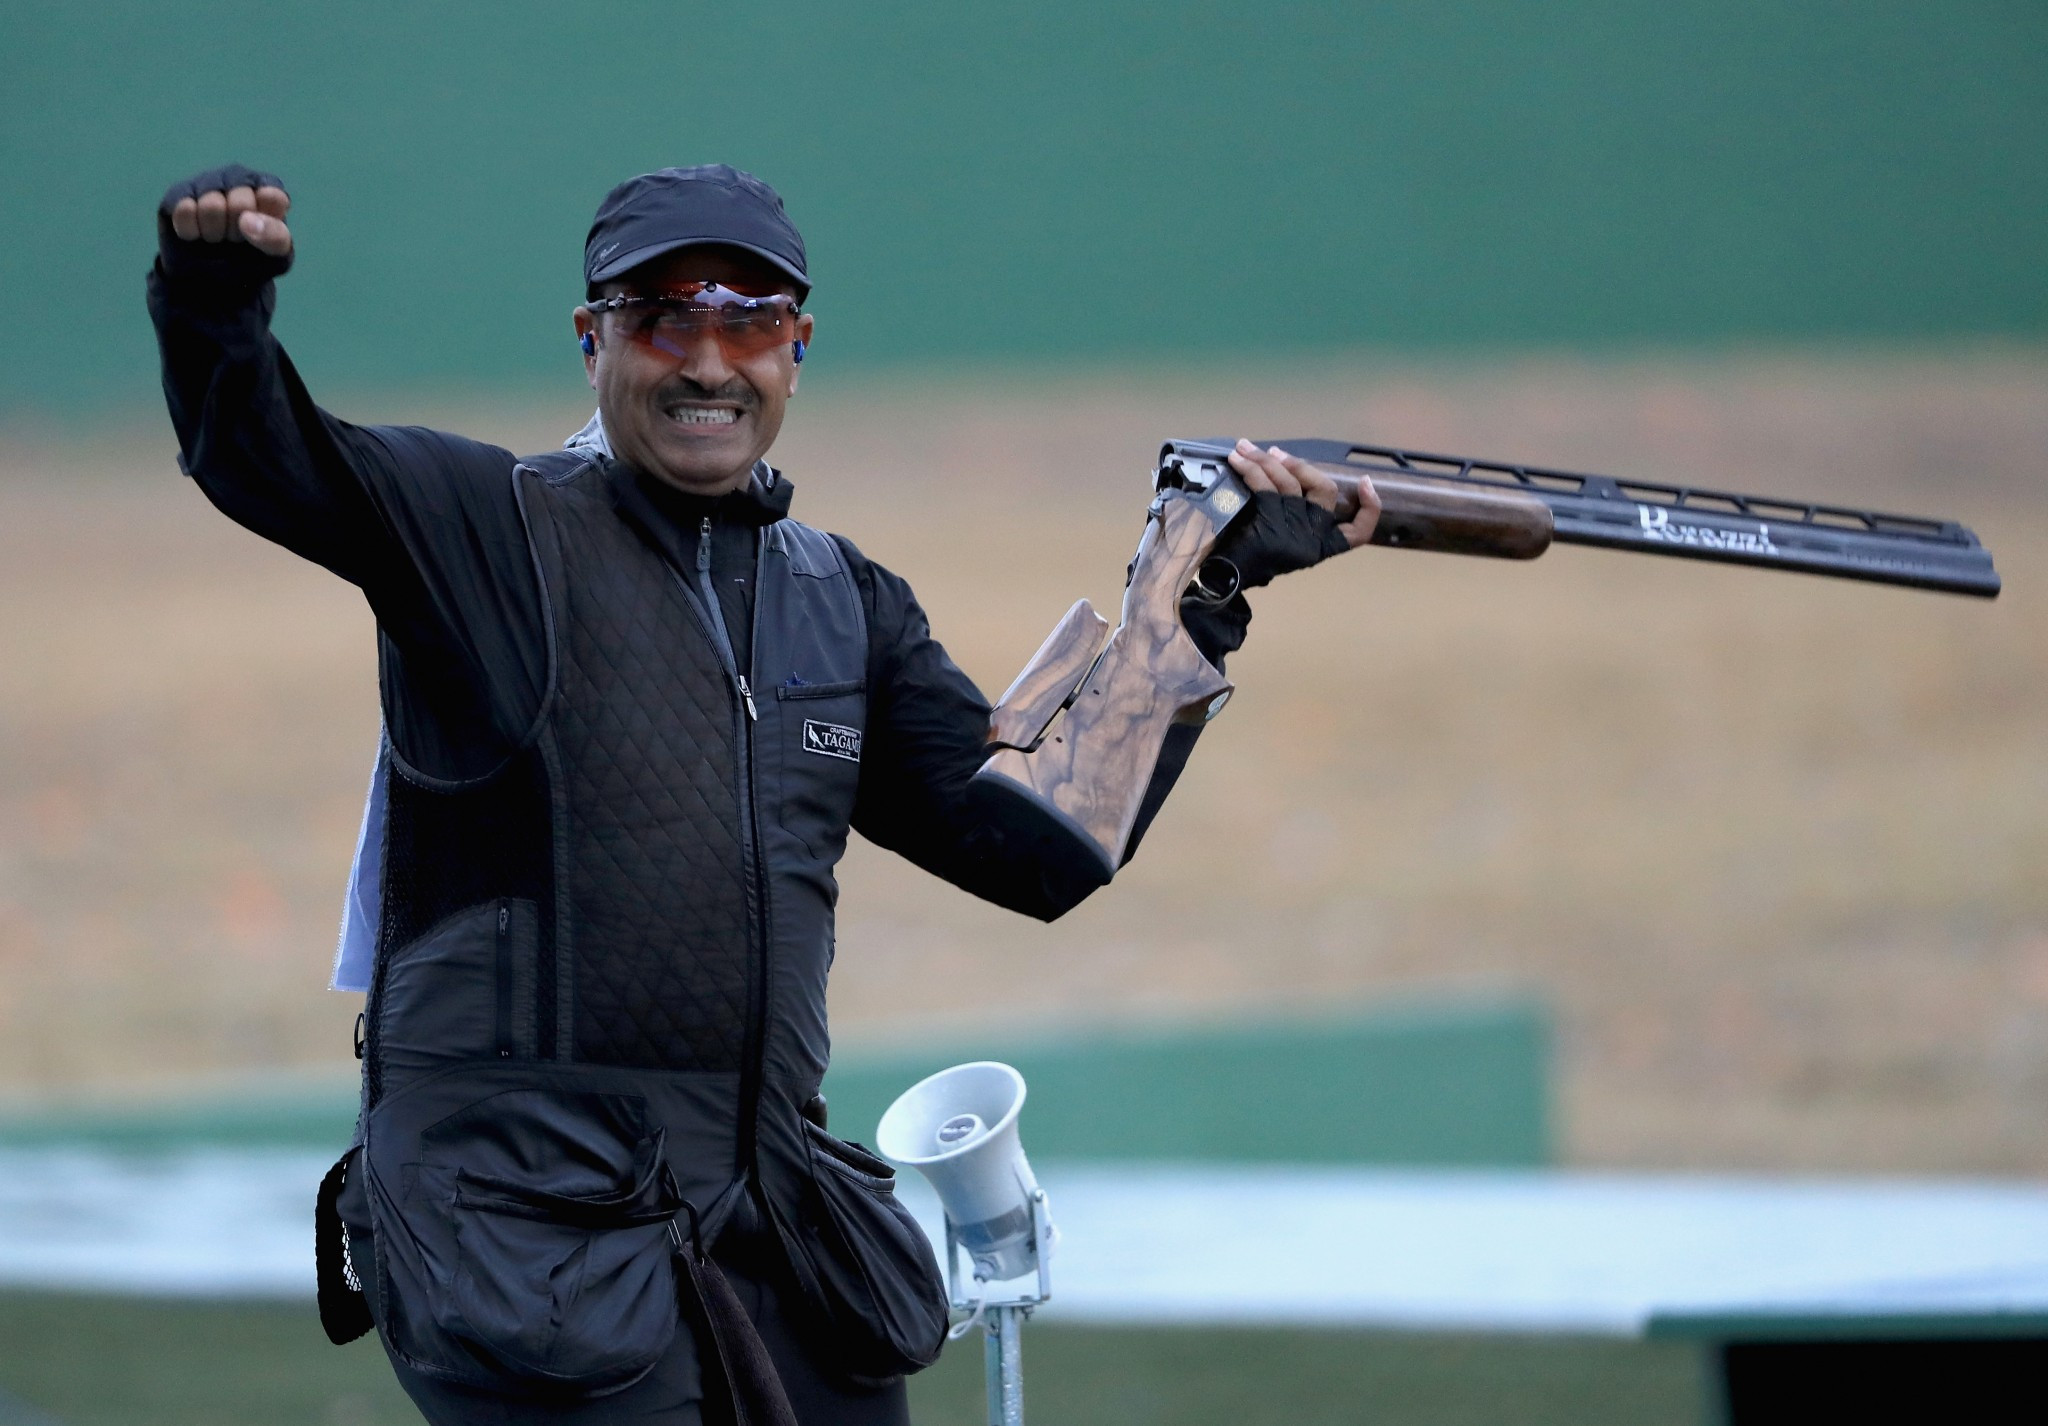 Fehaid Al-Deehani earned double trap gold as an independent athlete at Rio 2016 ©Getty Images